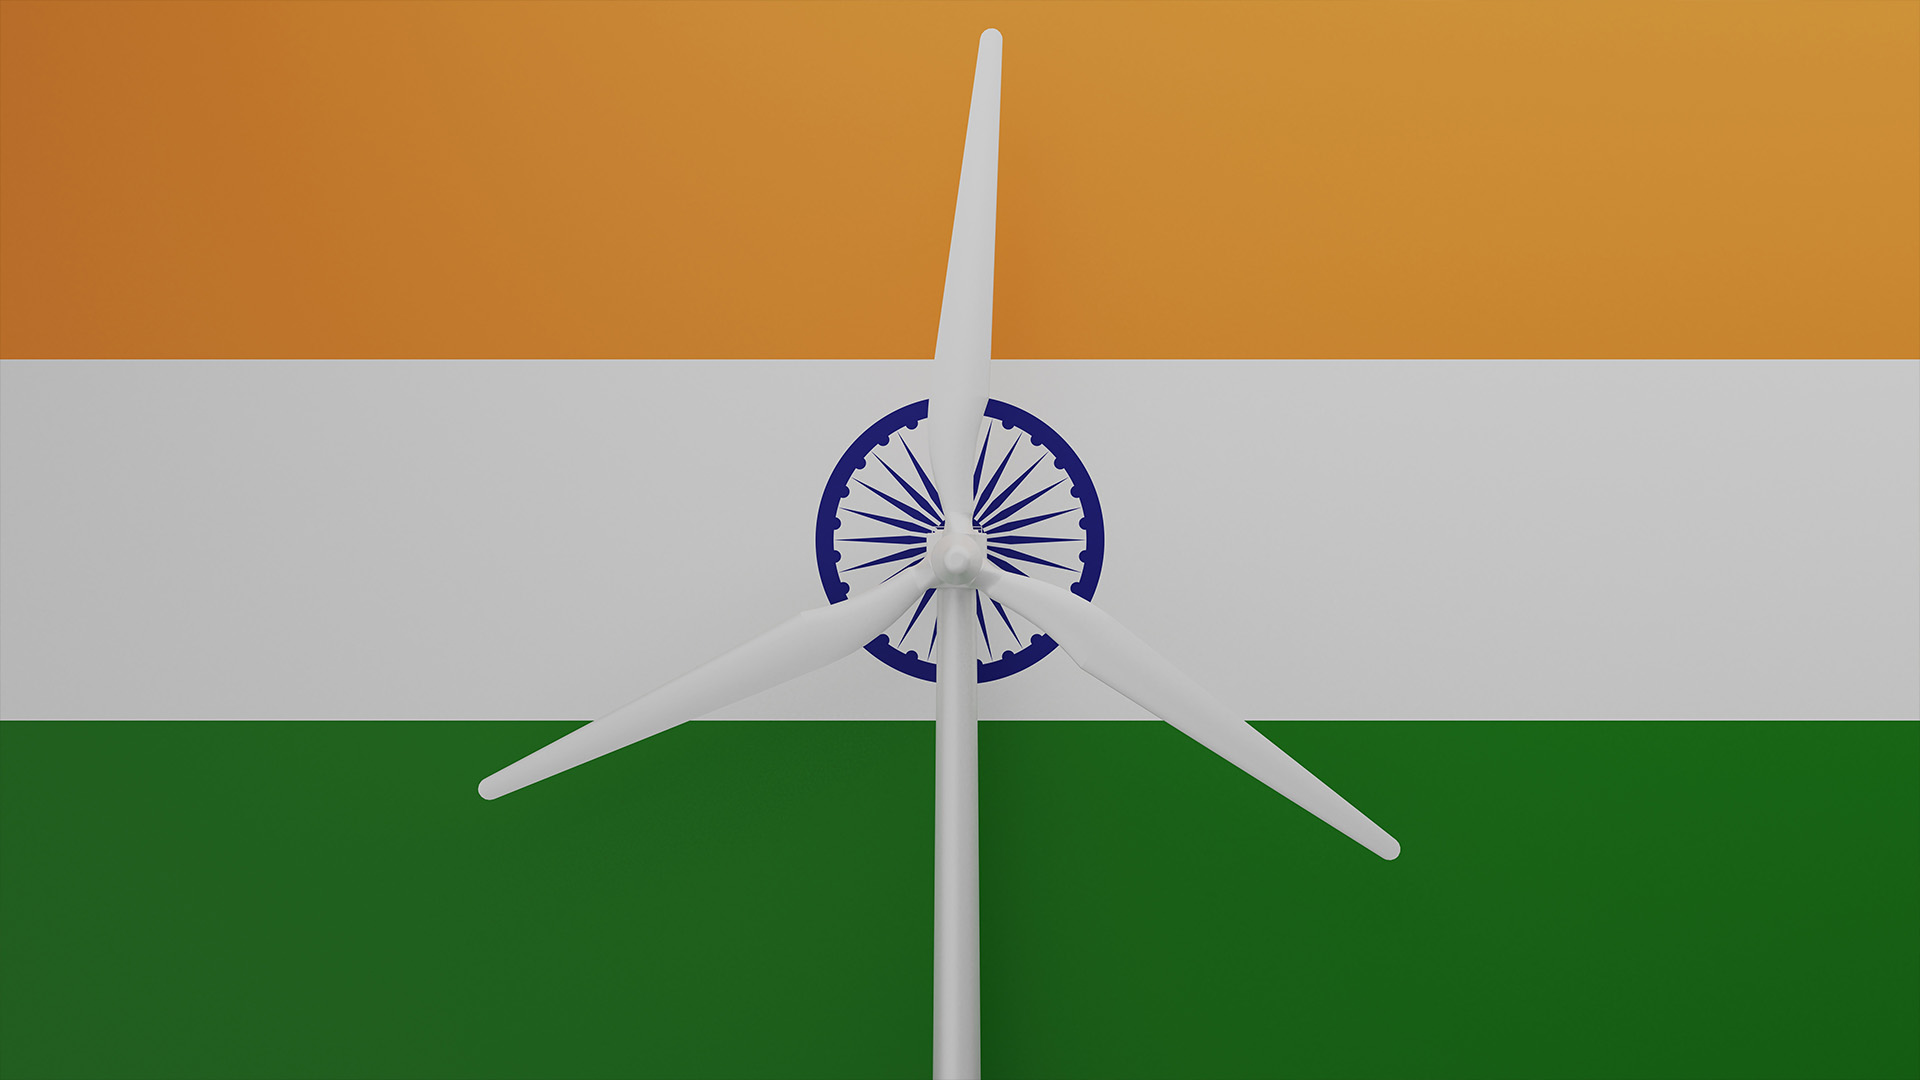 Developing offshore wind energy in India